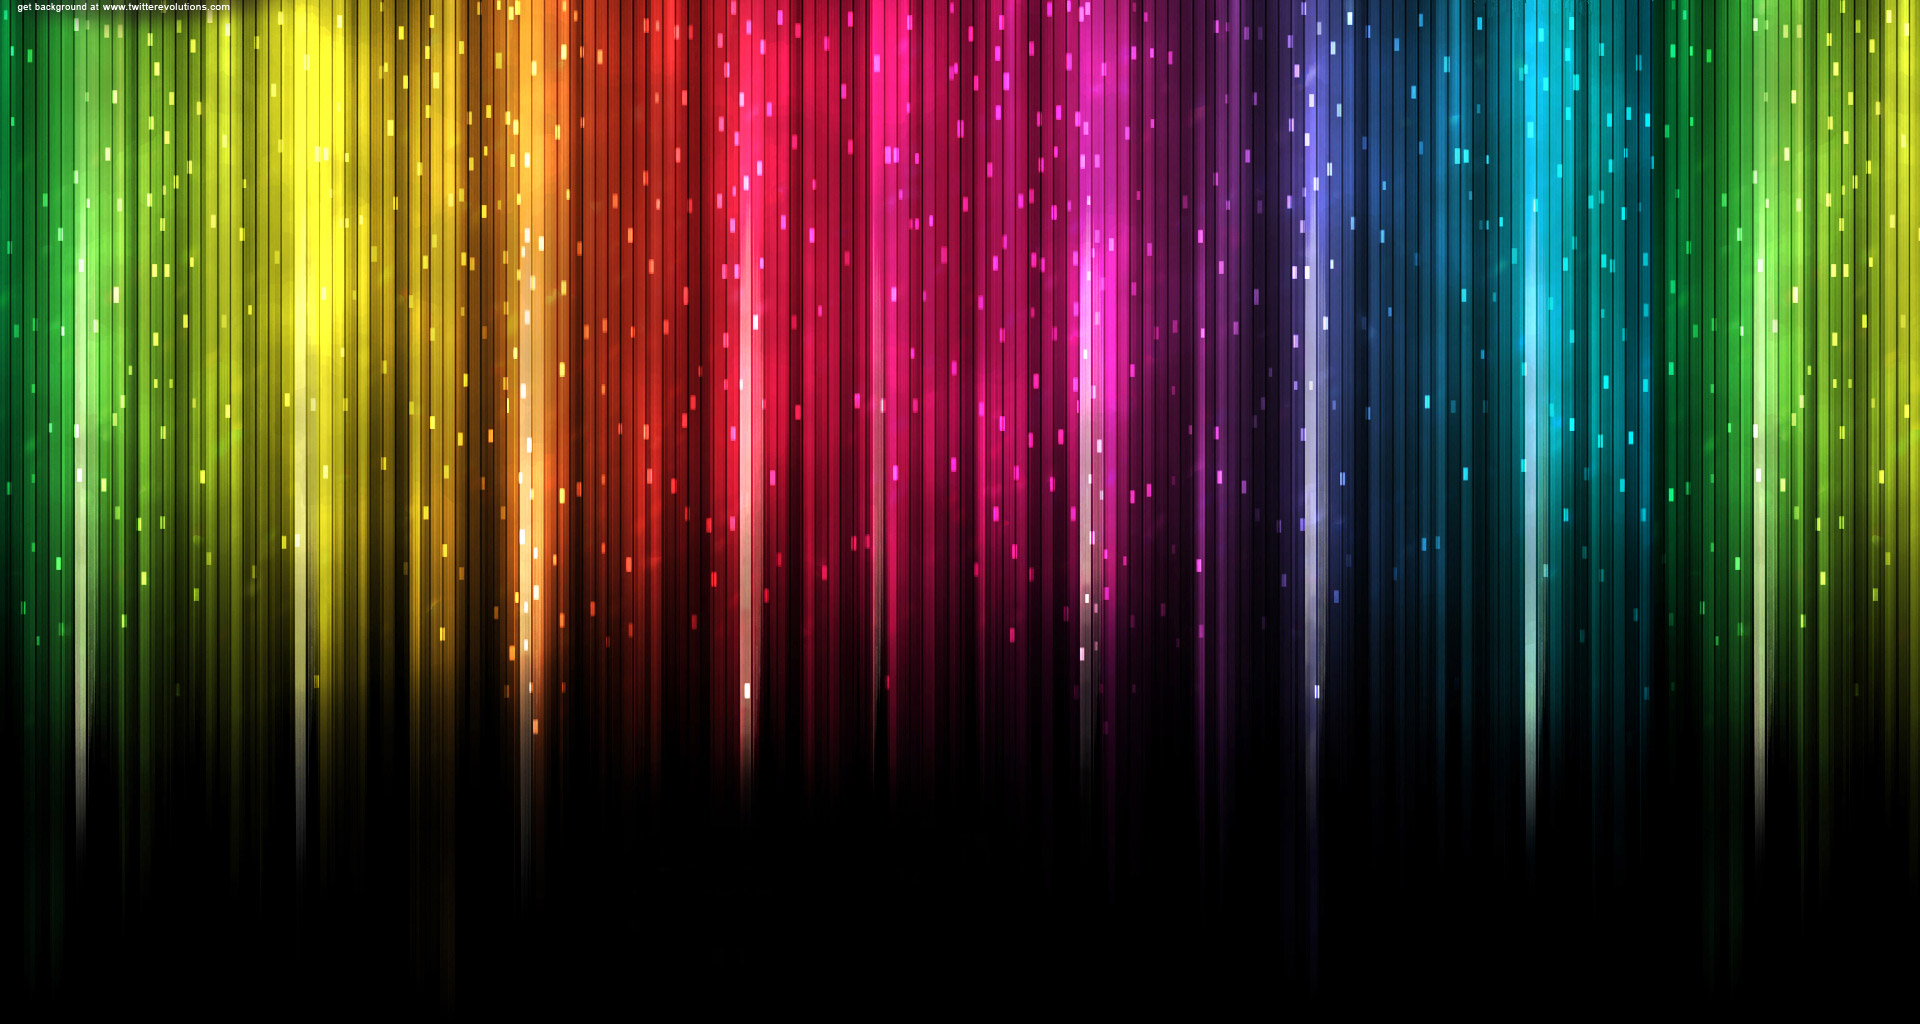 Gallery For gt Fun Colorful Wallpapers